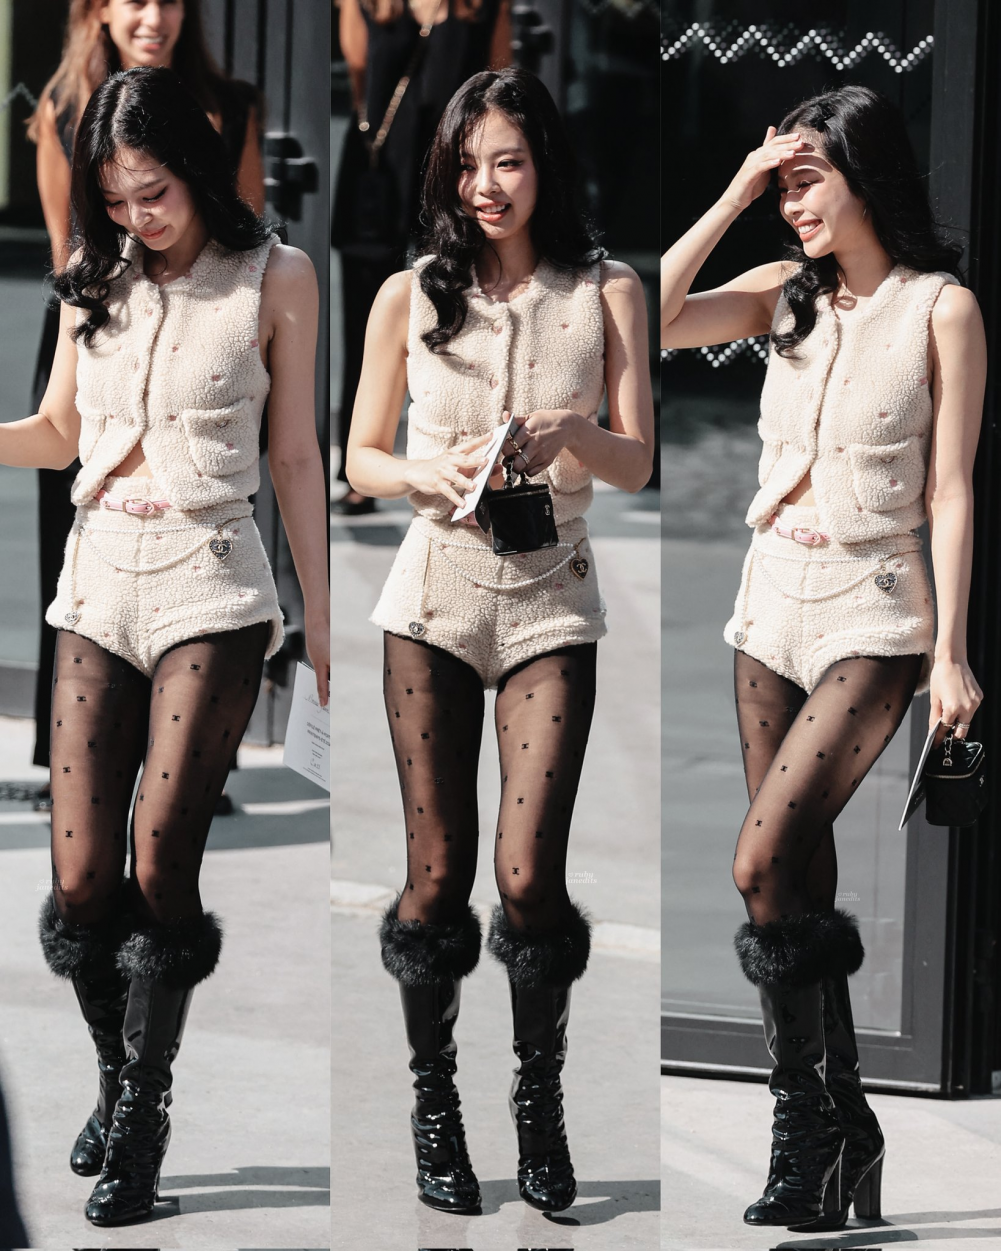 jennie chanel outfit